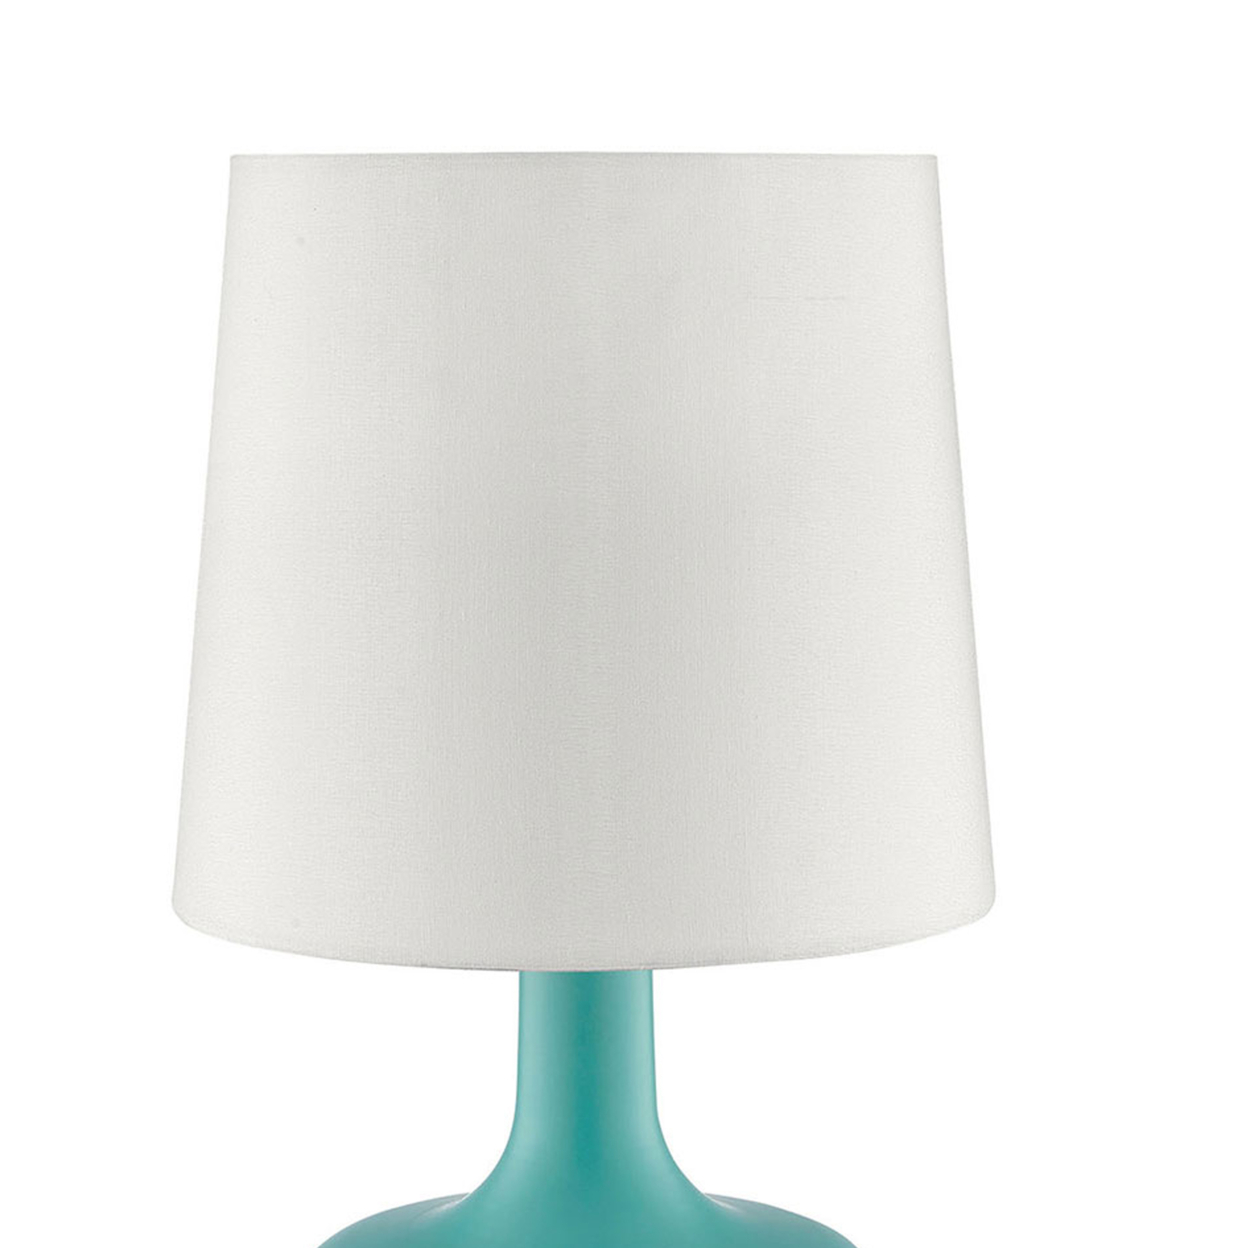 Metal Pot Belly Base Table Lamp With 3 Way Touch Light, White And Sky Blue- Saltoro Sherpi